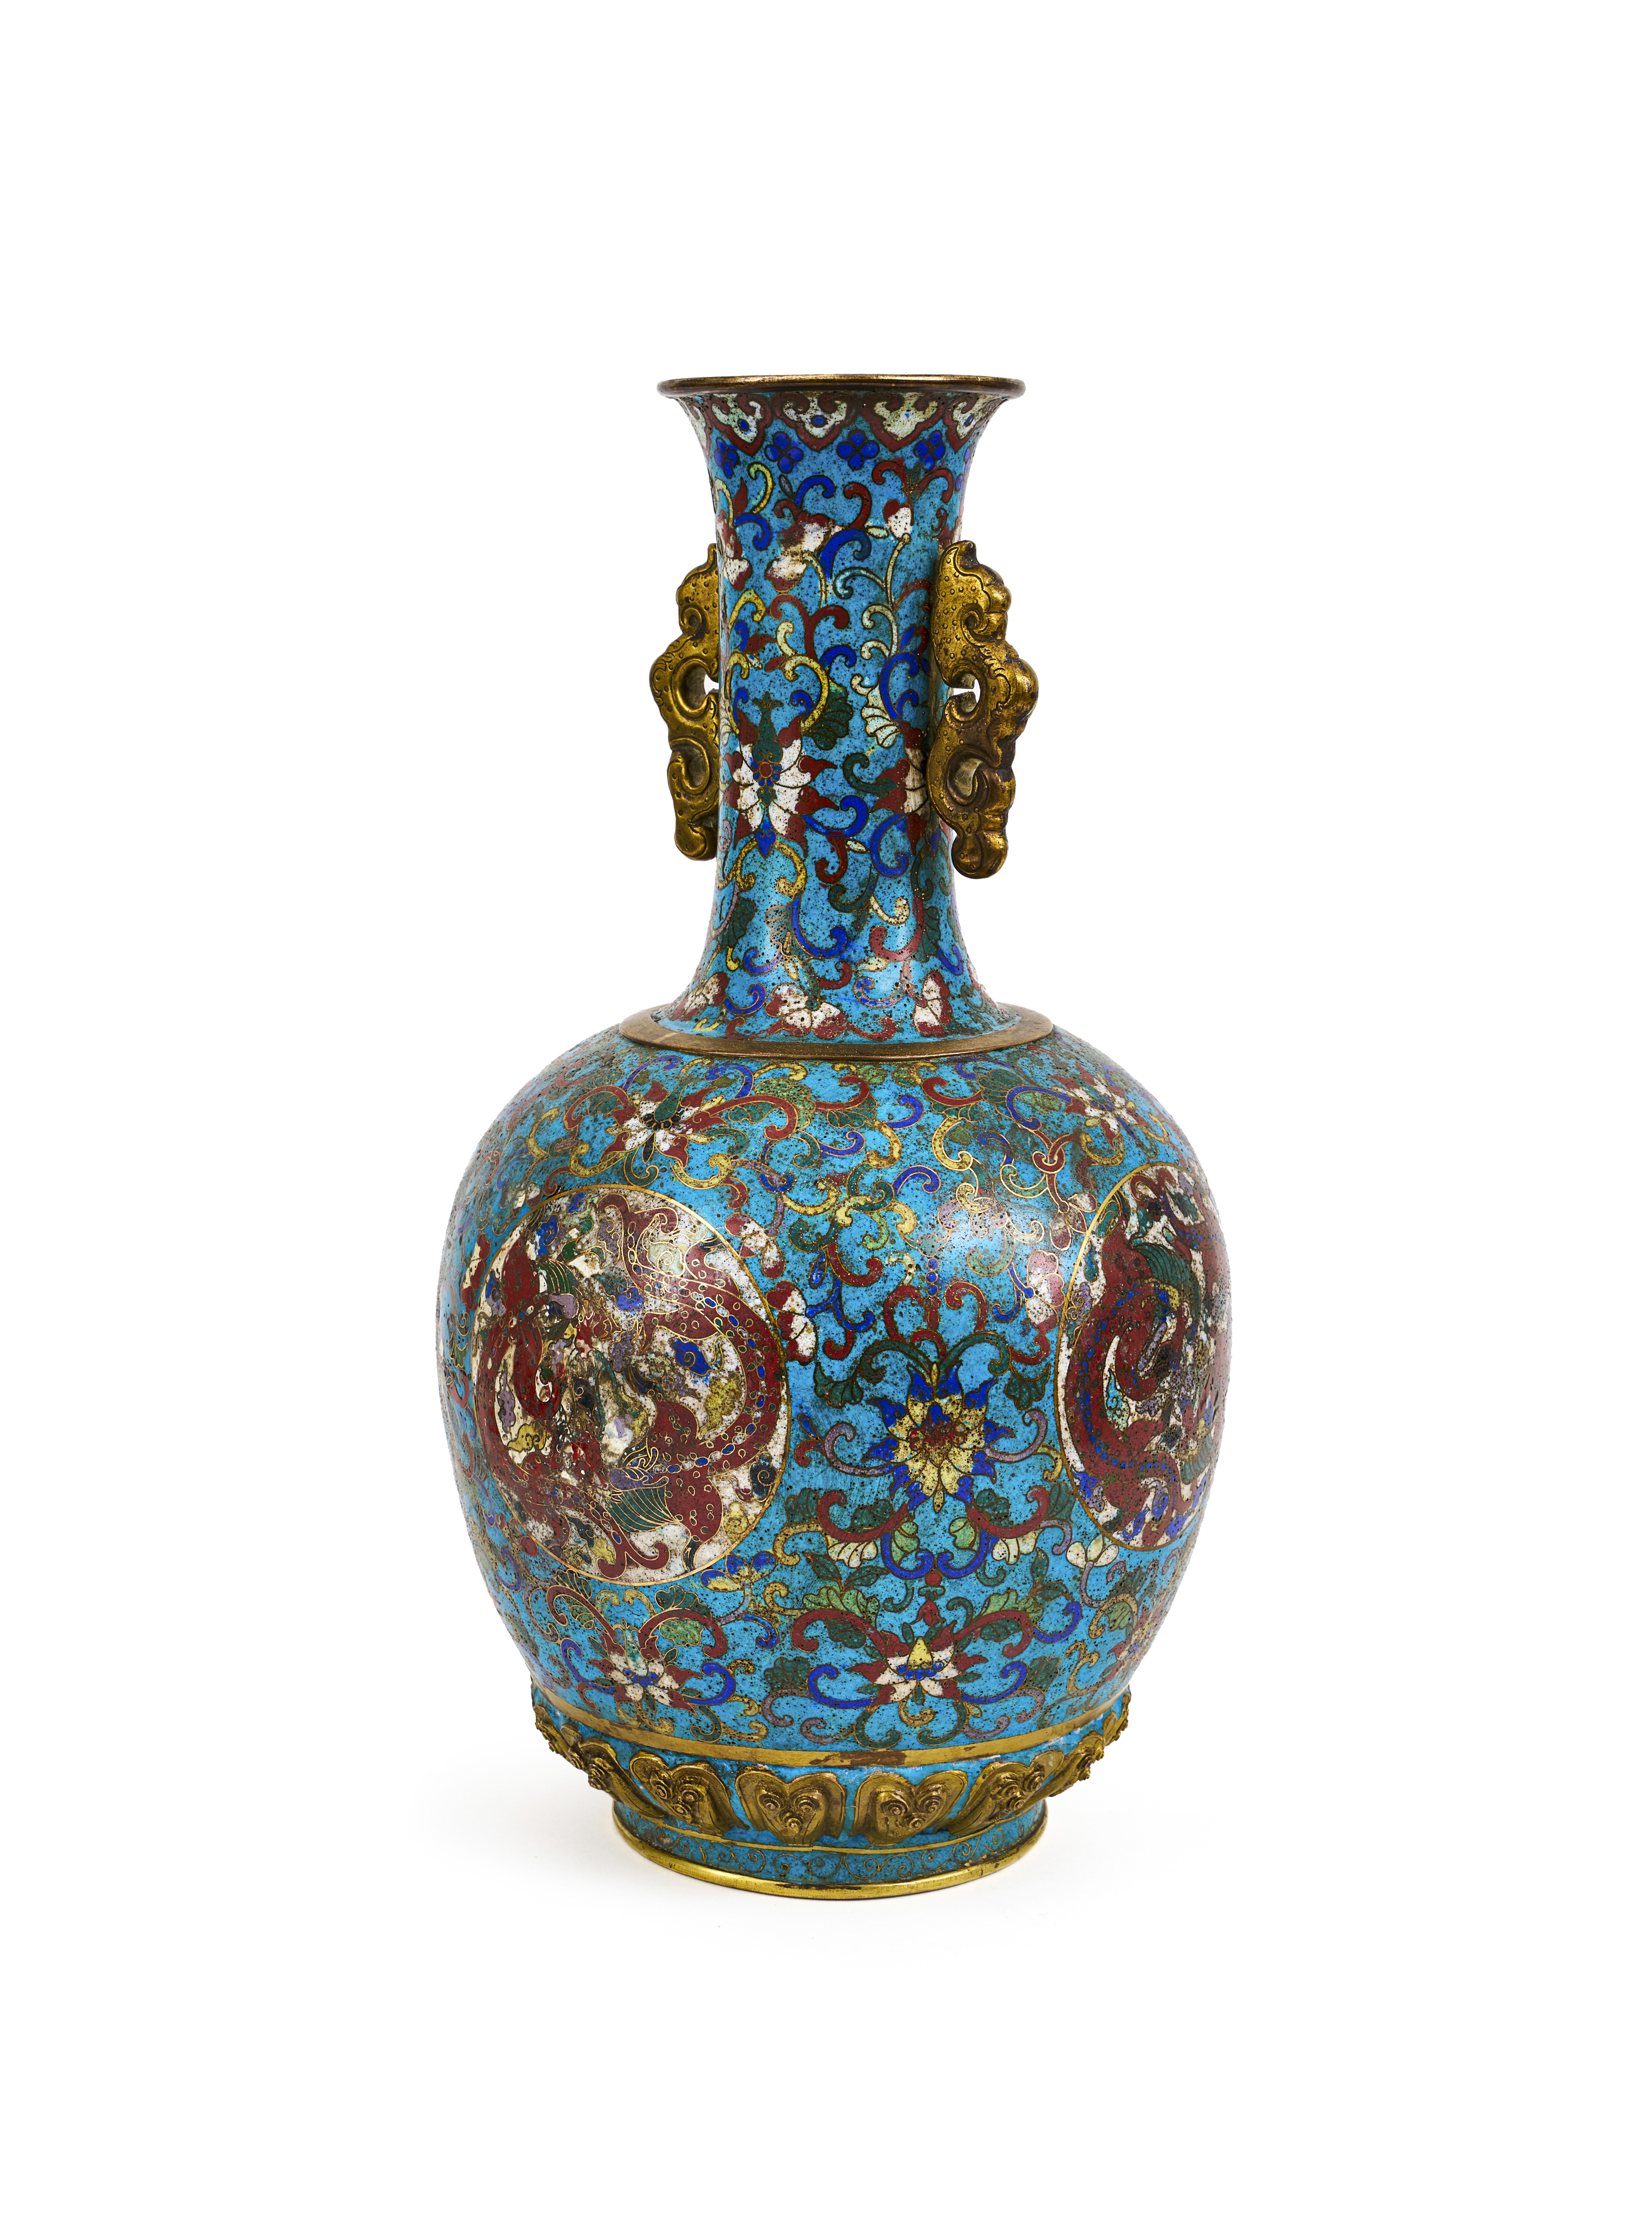 A LARGE CHINESE CLOISONNE VASE, QIANLONG PERIOD (1736-1795) - Image 2 of 5